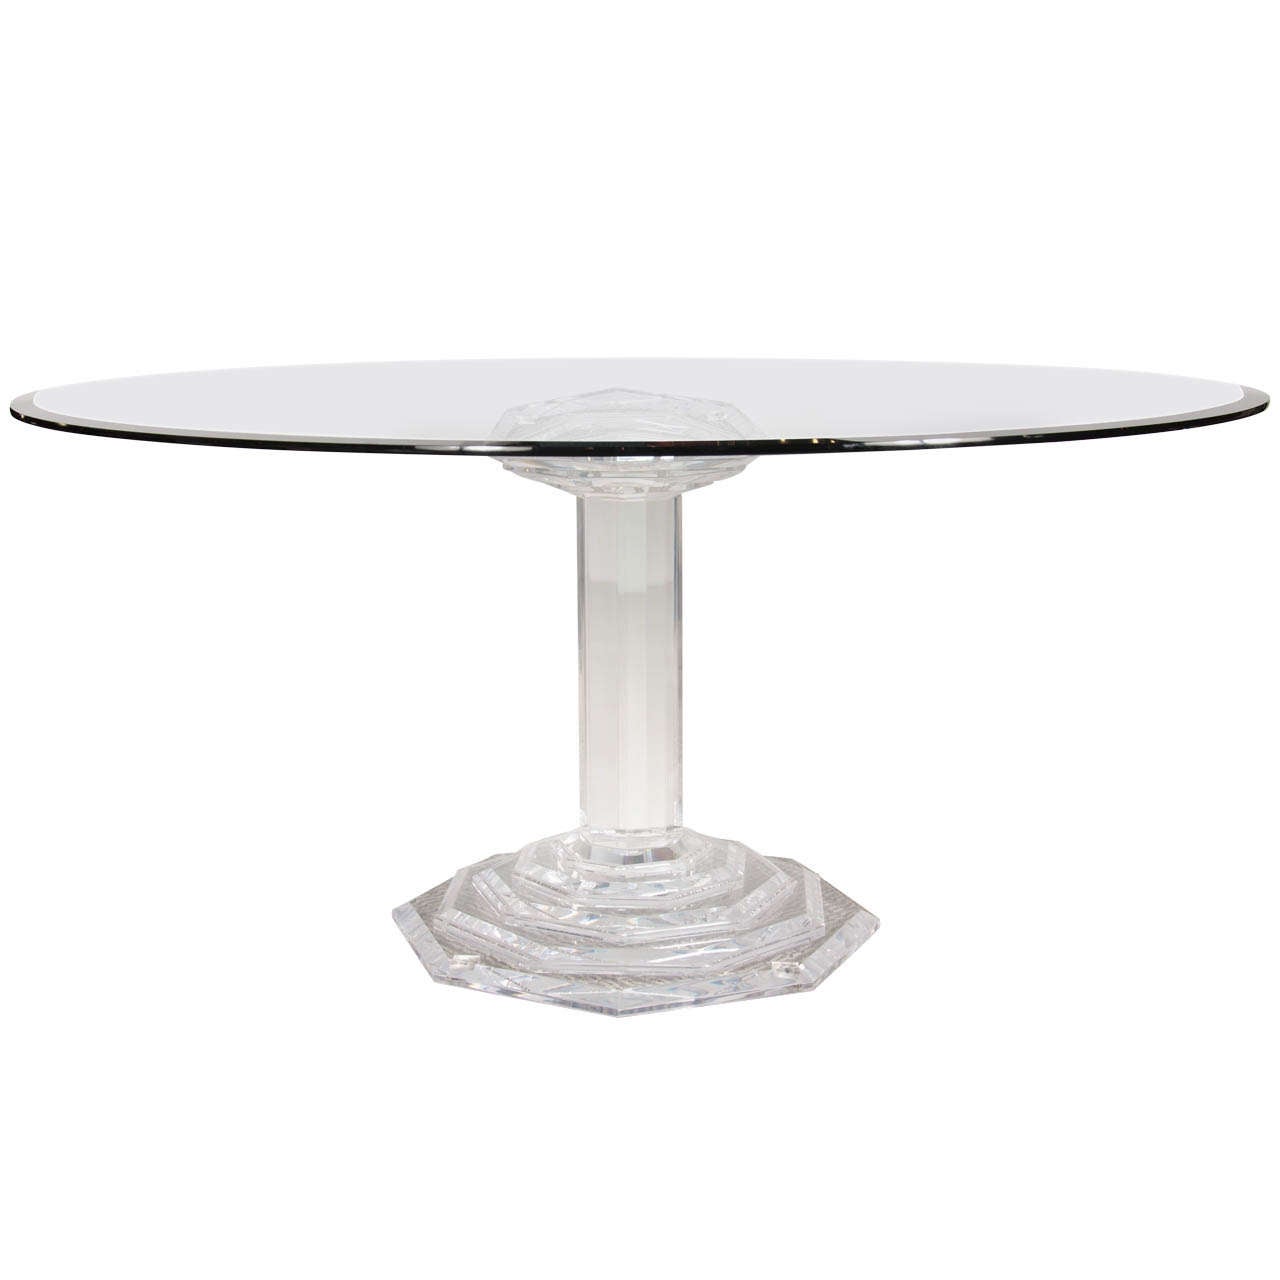 Mid CenturyModernist Lucite and Glass Round Dining Table